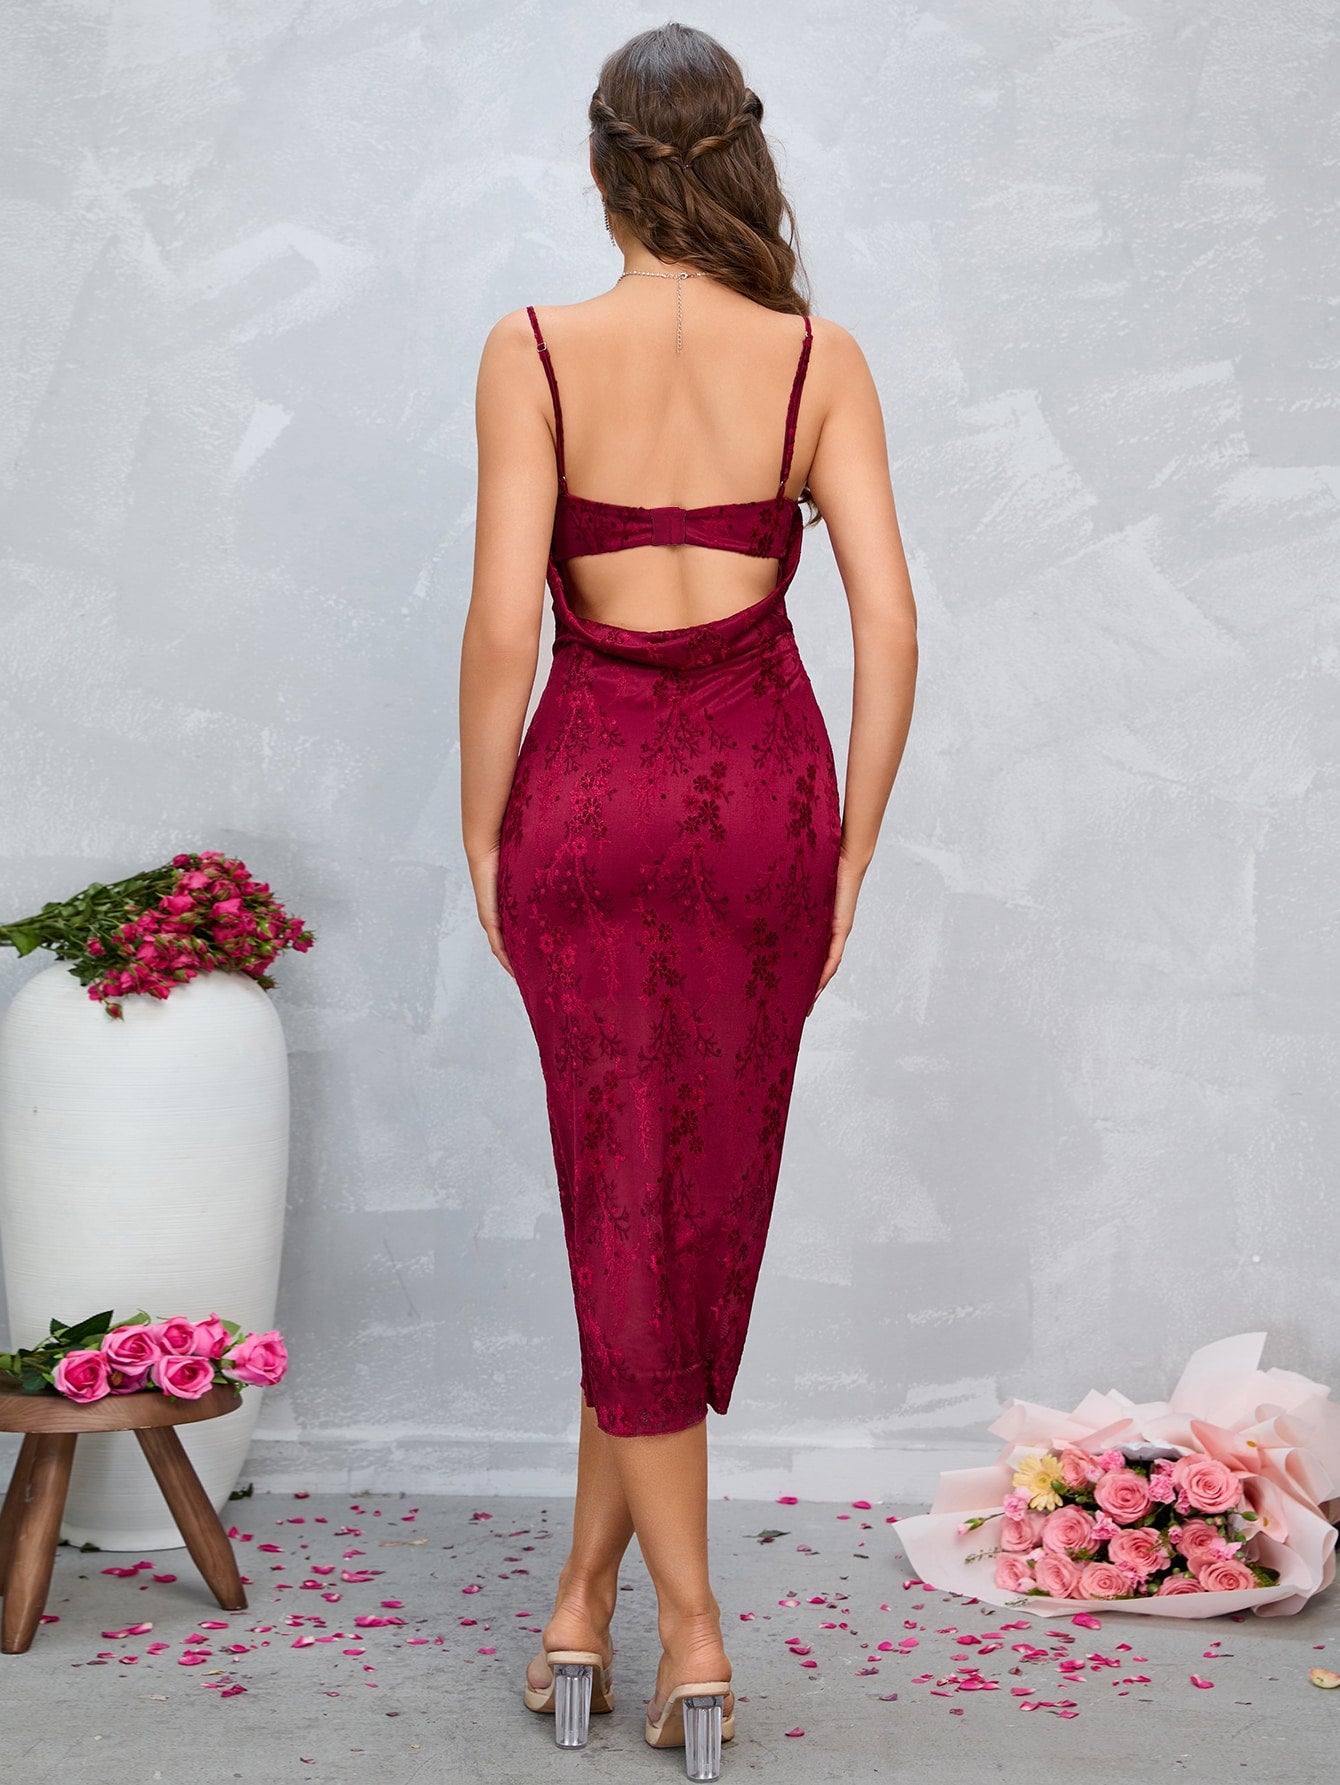 Floral Jacquard Cami Form-Fitting Bodycon Dress: Embrace Elegance and Feminine Sophistication